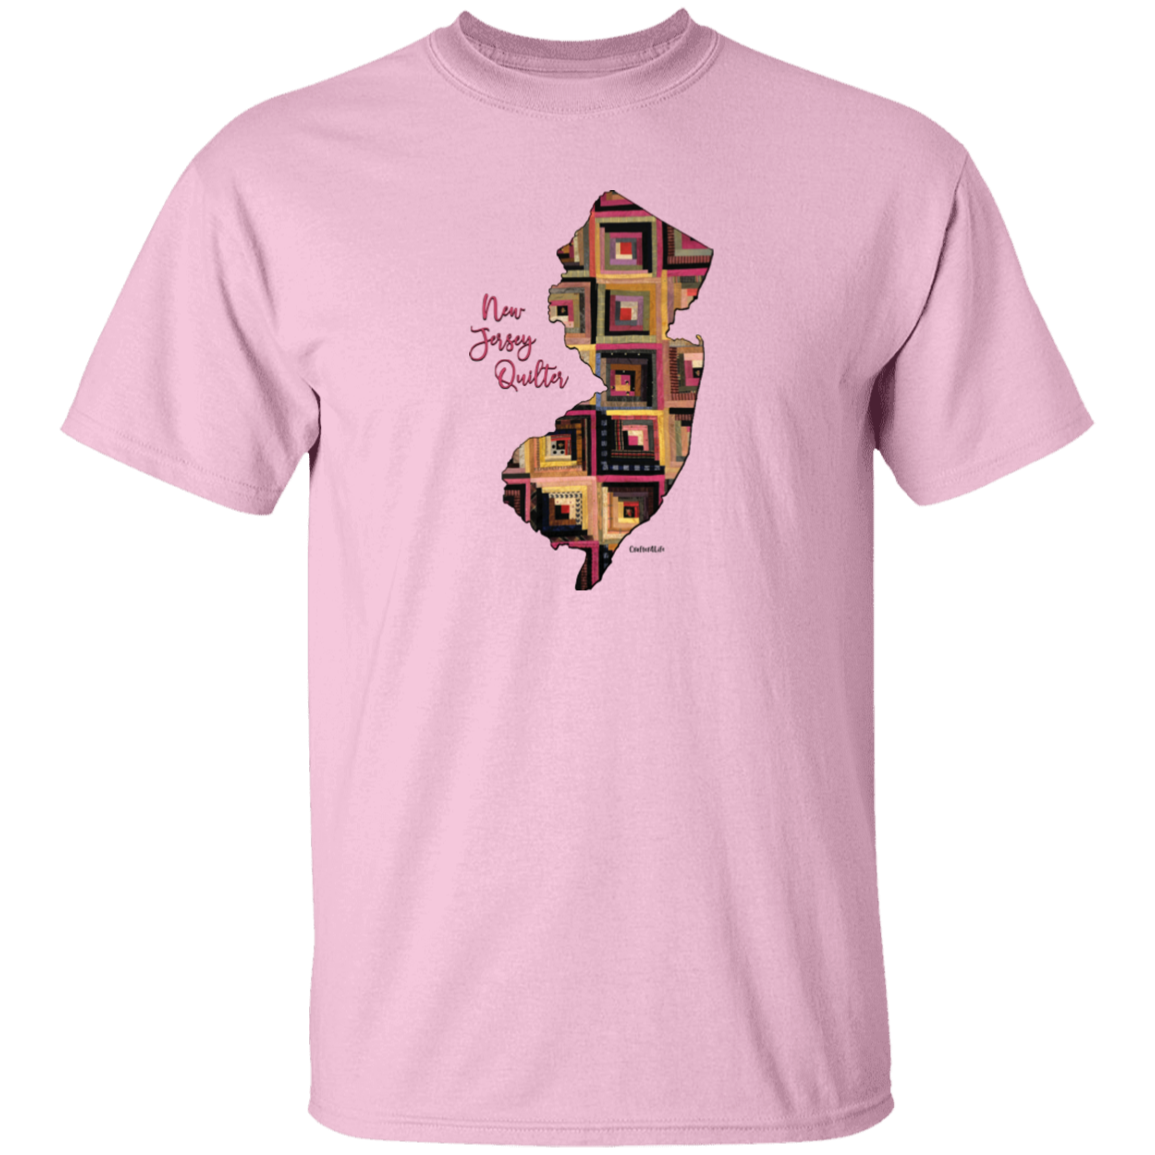 New Jersey Quilter T-Shirt, Gift for Quilting Friends and Family